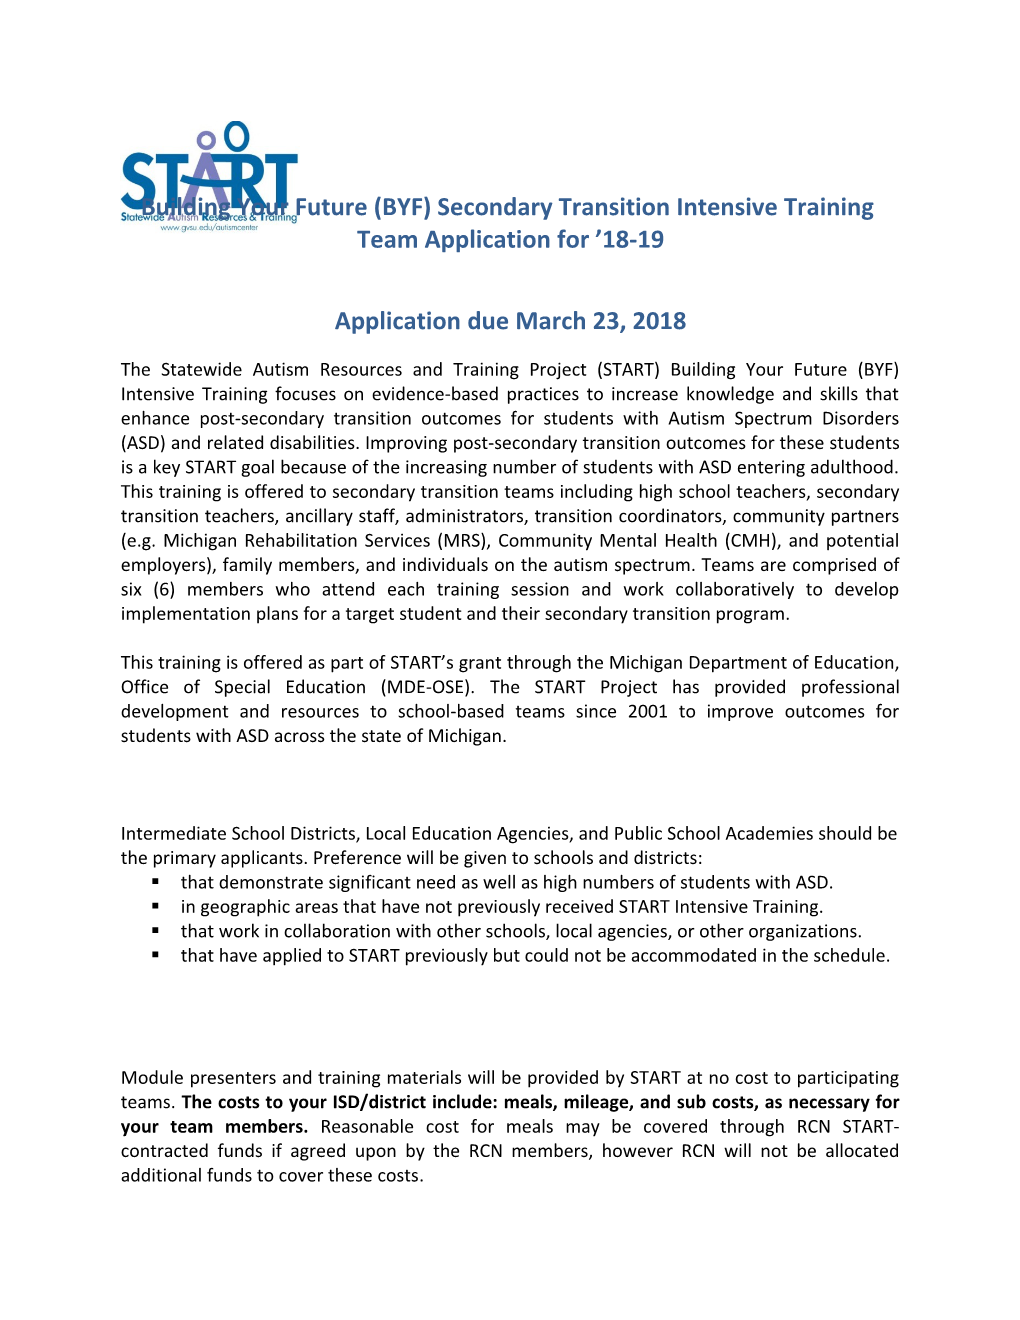 Building Your Future (BYF) Secondary Transition Intensive Training